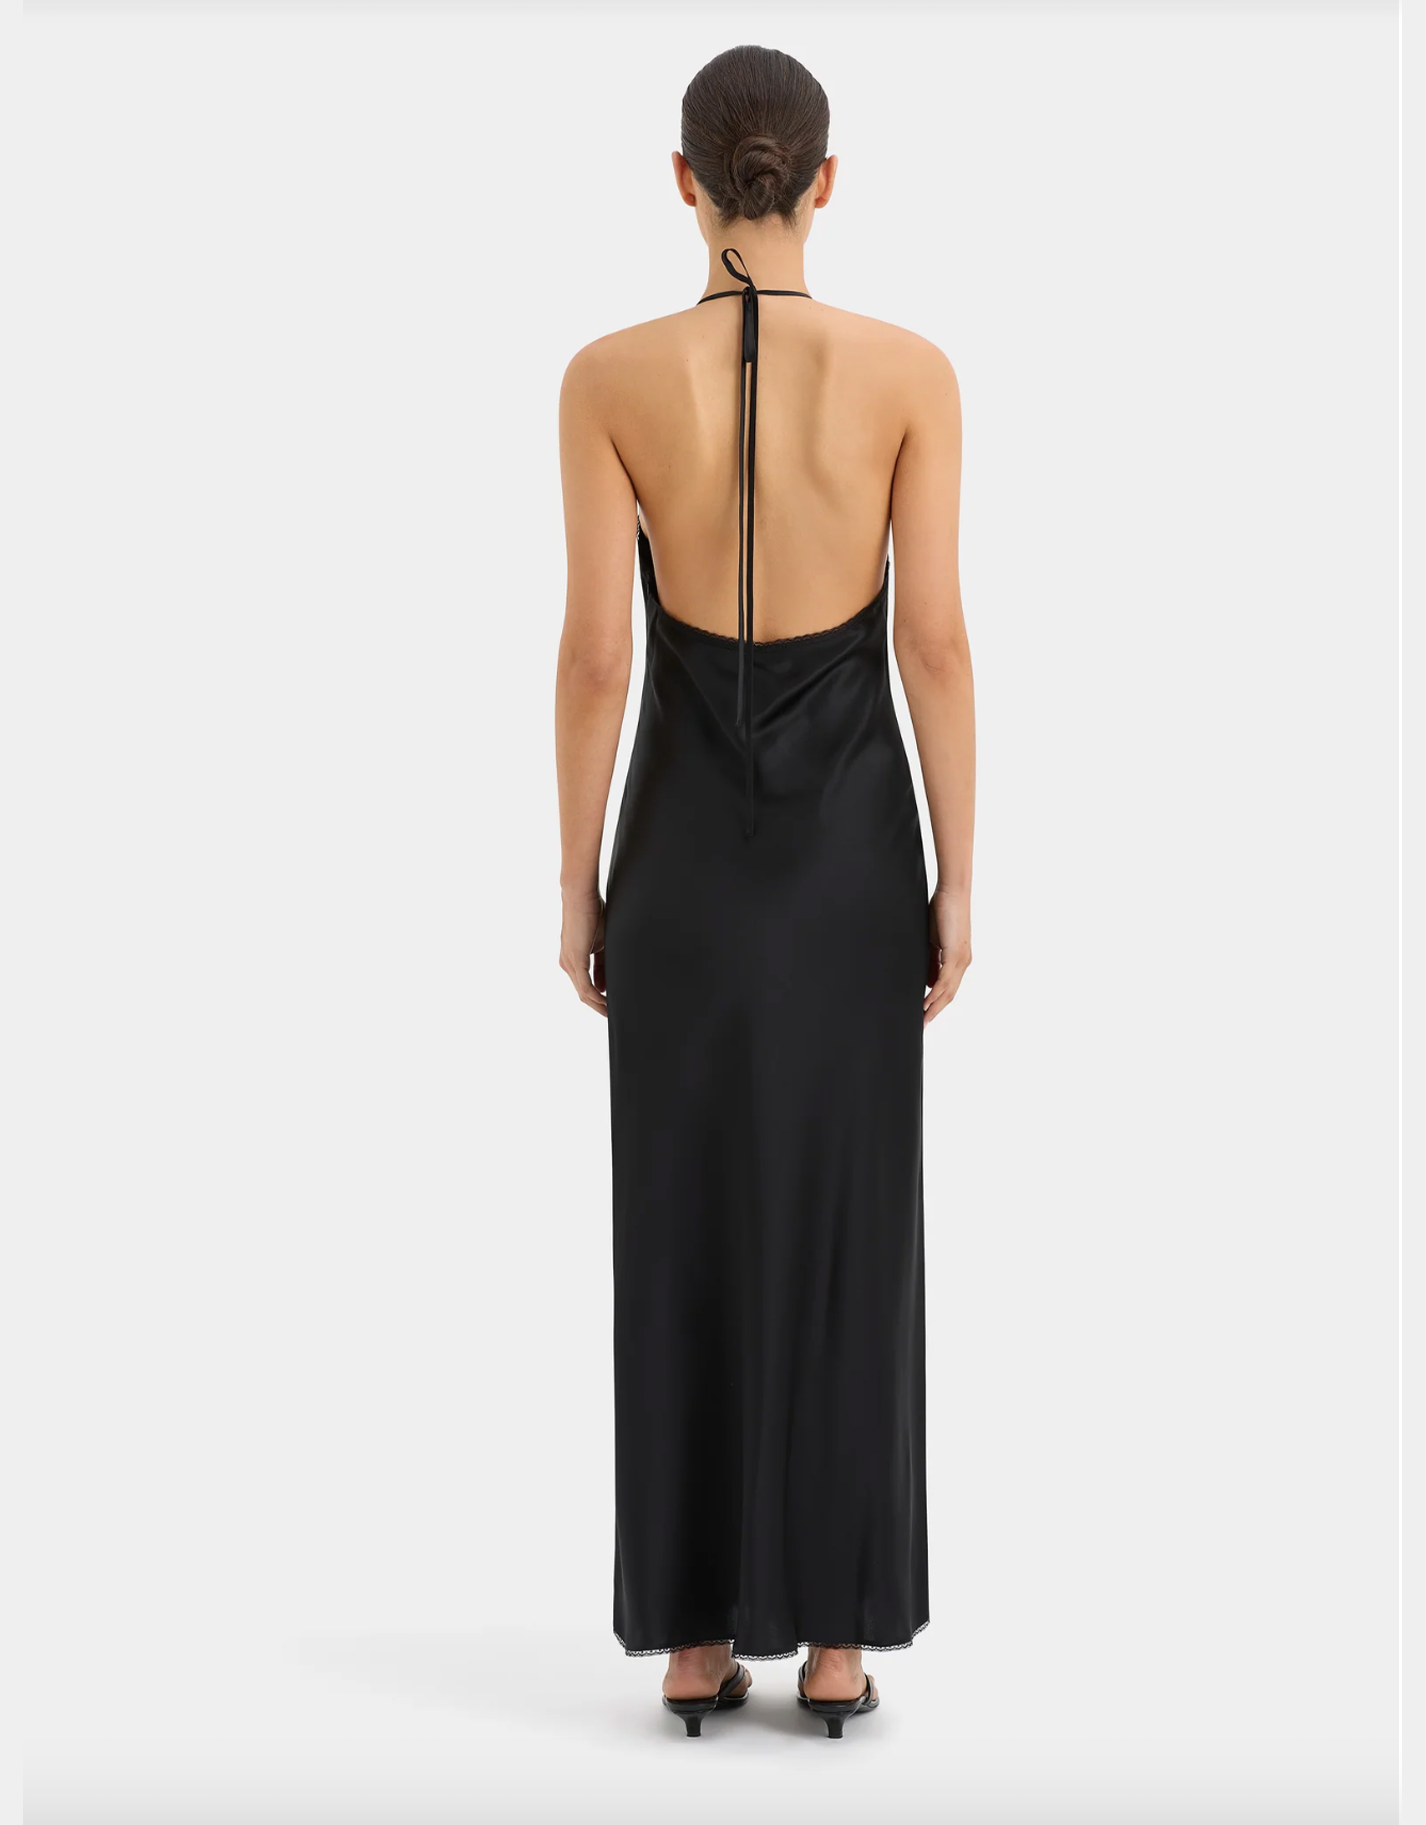 Sir The Label Aries Halter Gown Black